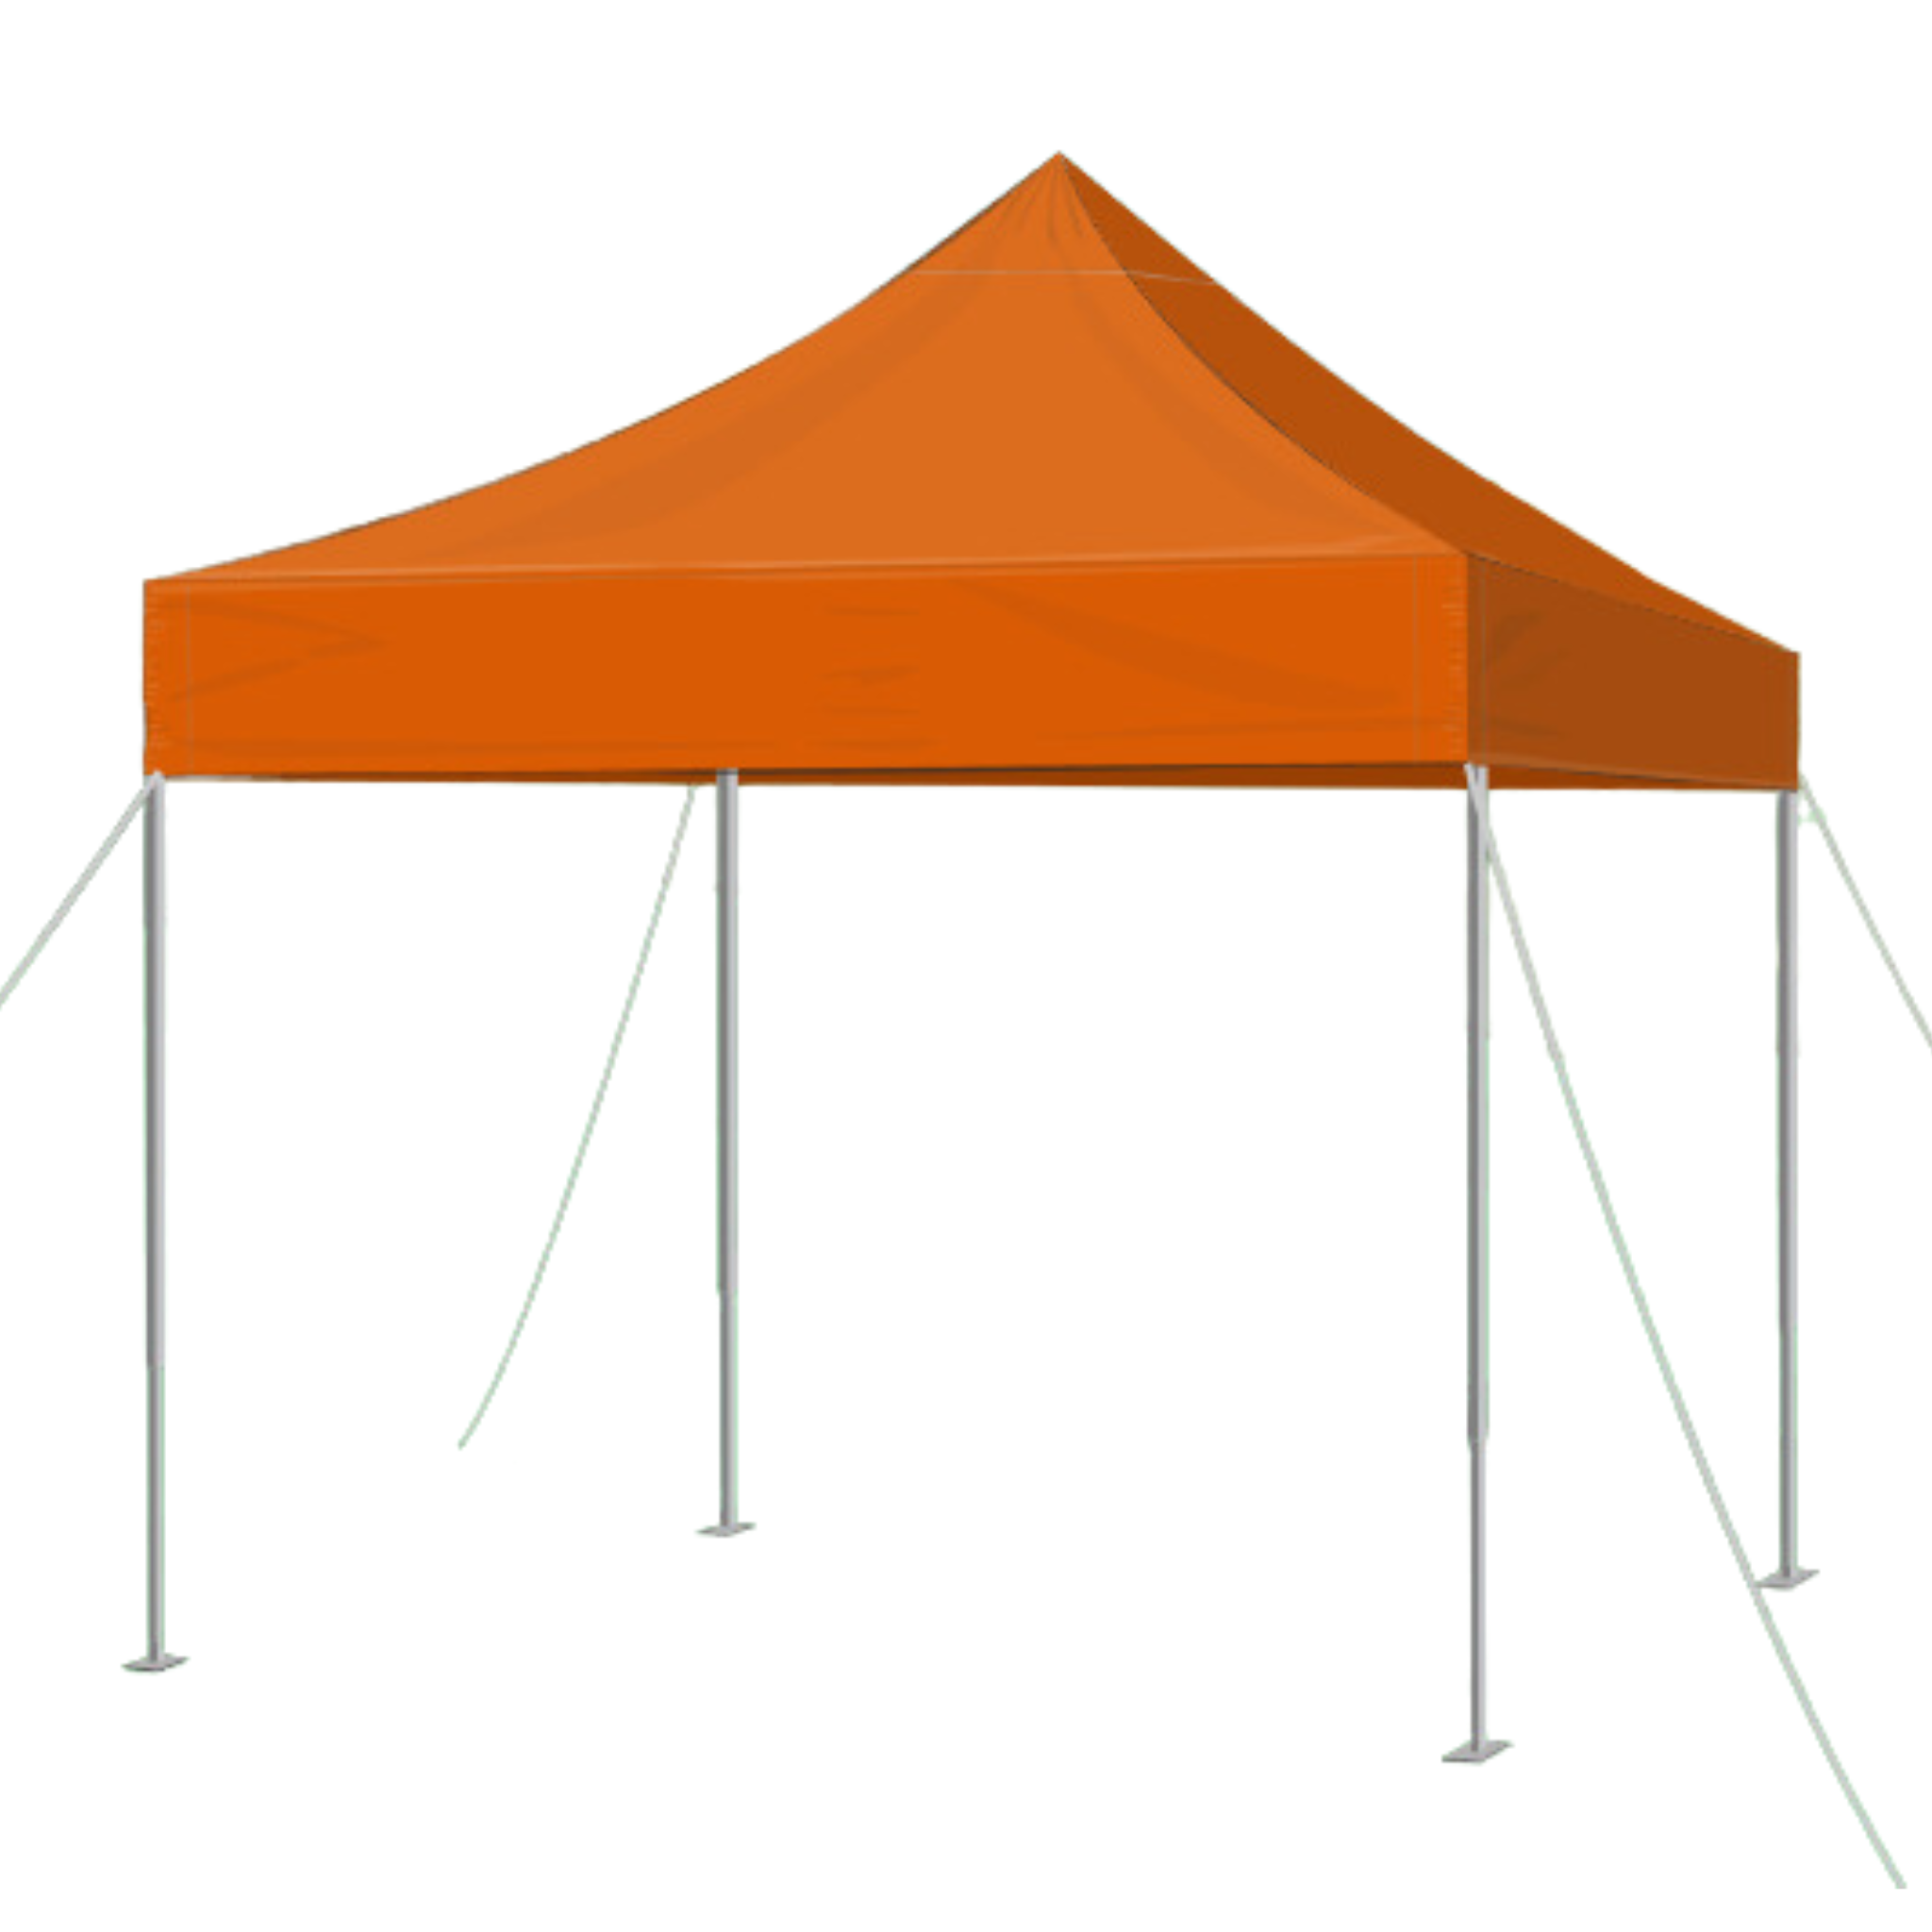 Lavabis folding tent system professional quality